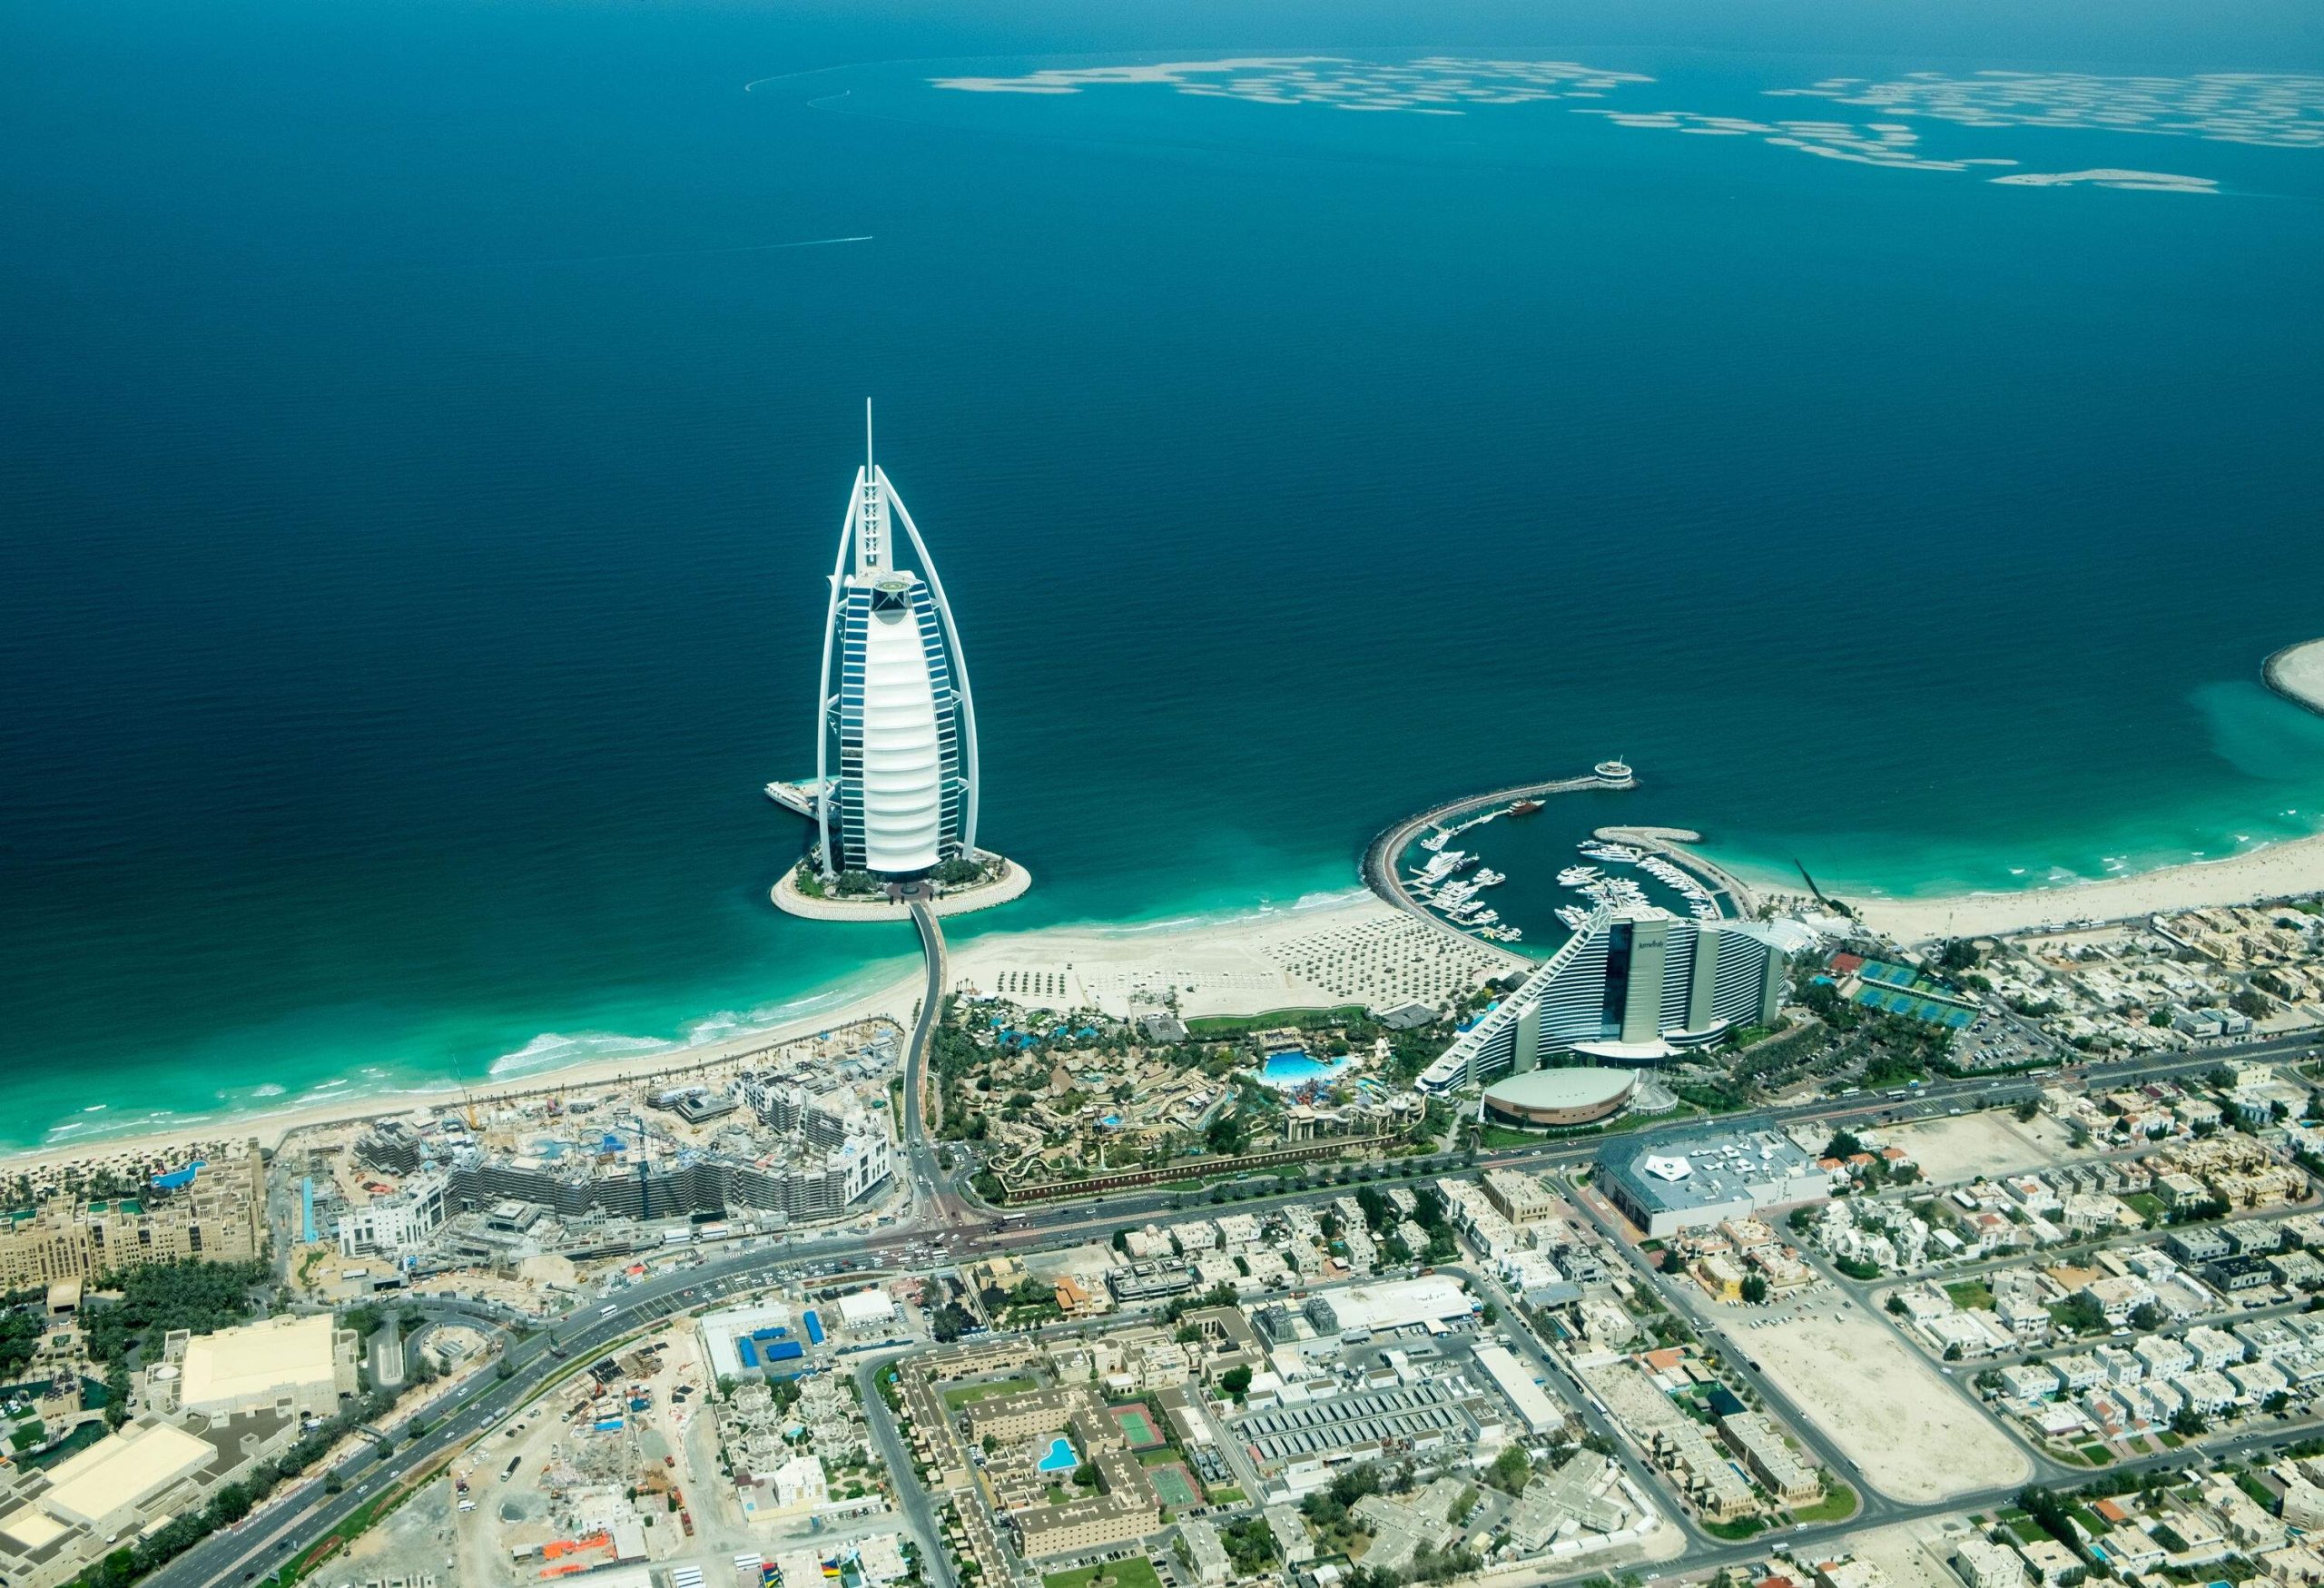 The Jumeirah district with its beach and the magnificent Burj Al Arab.